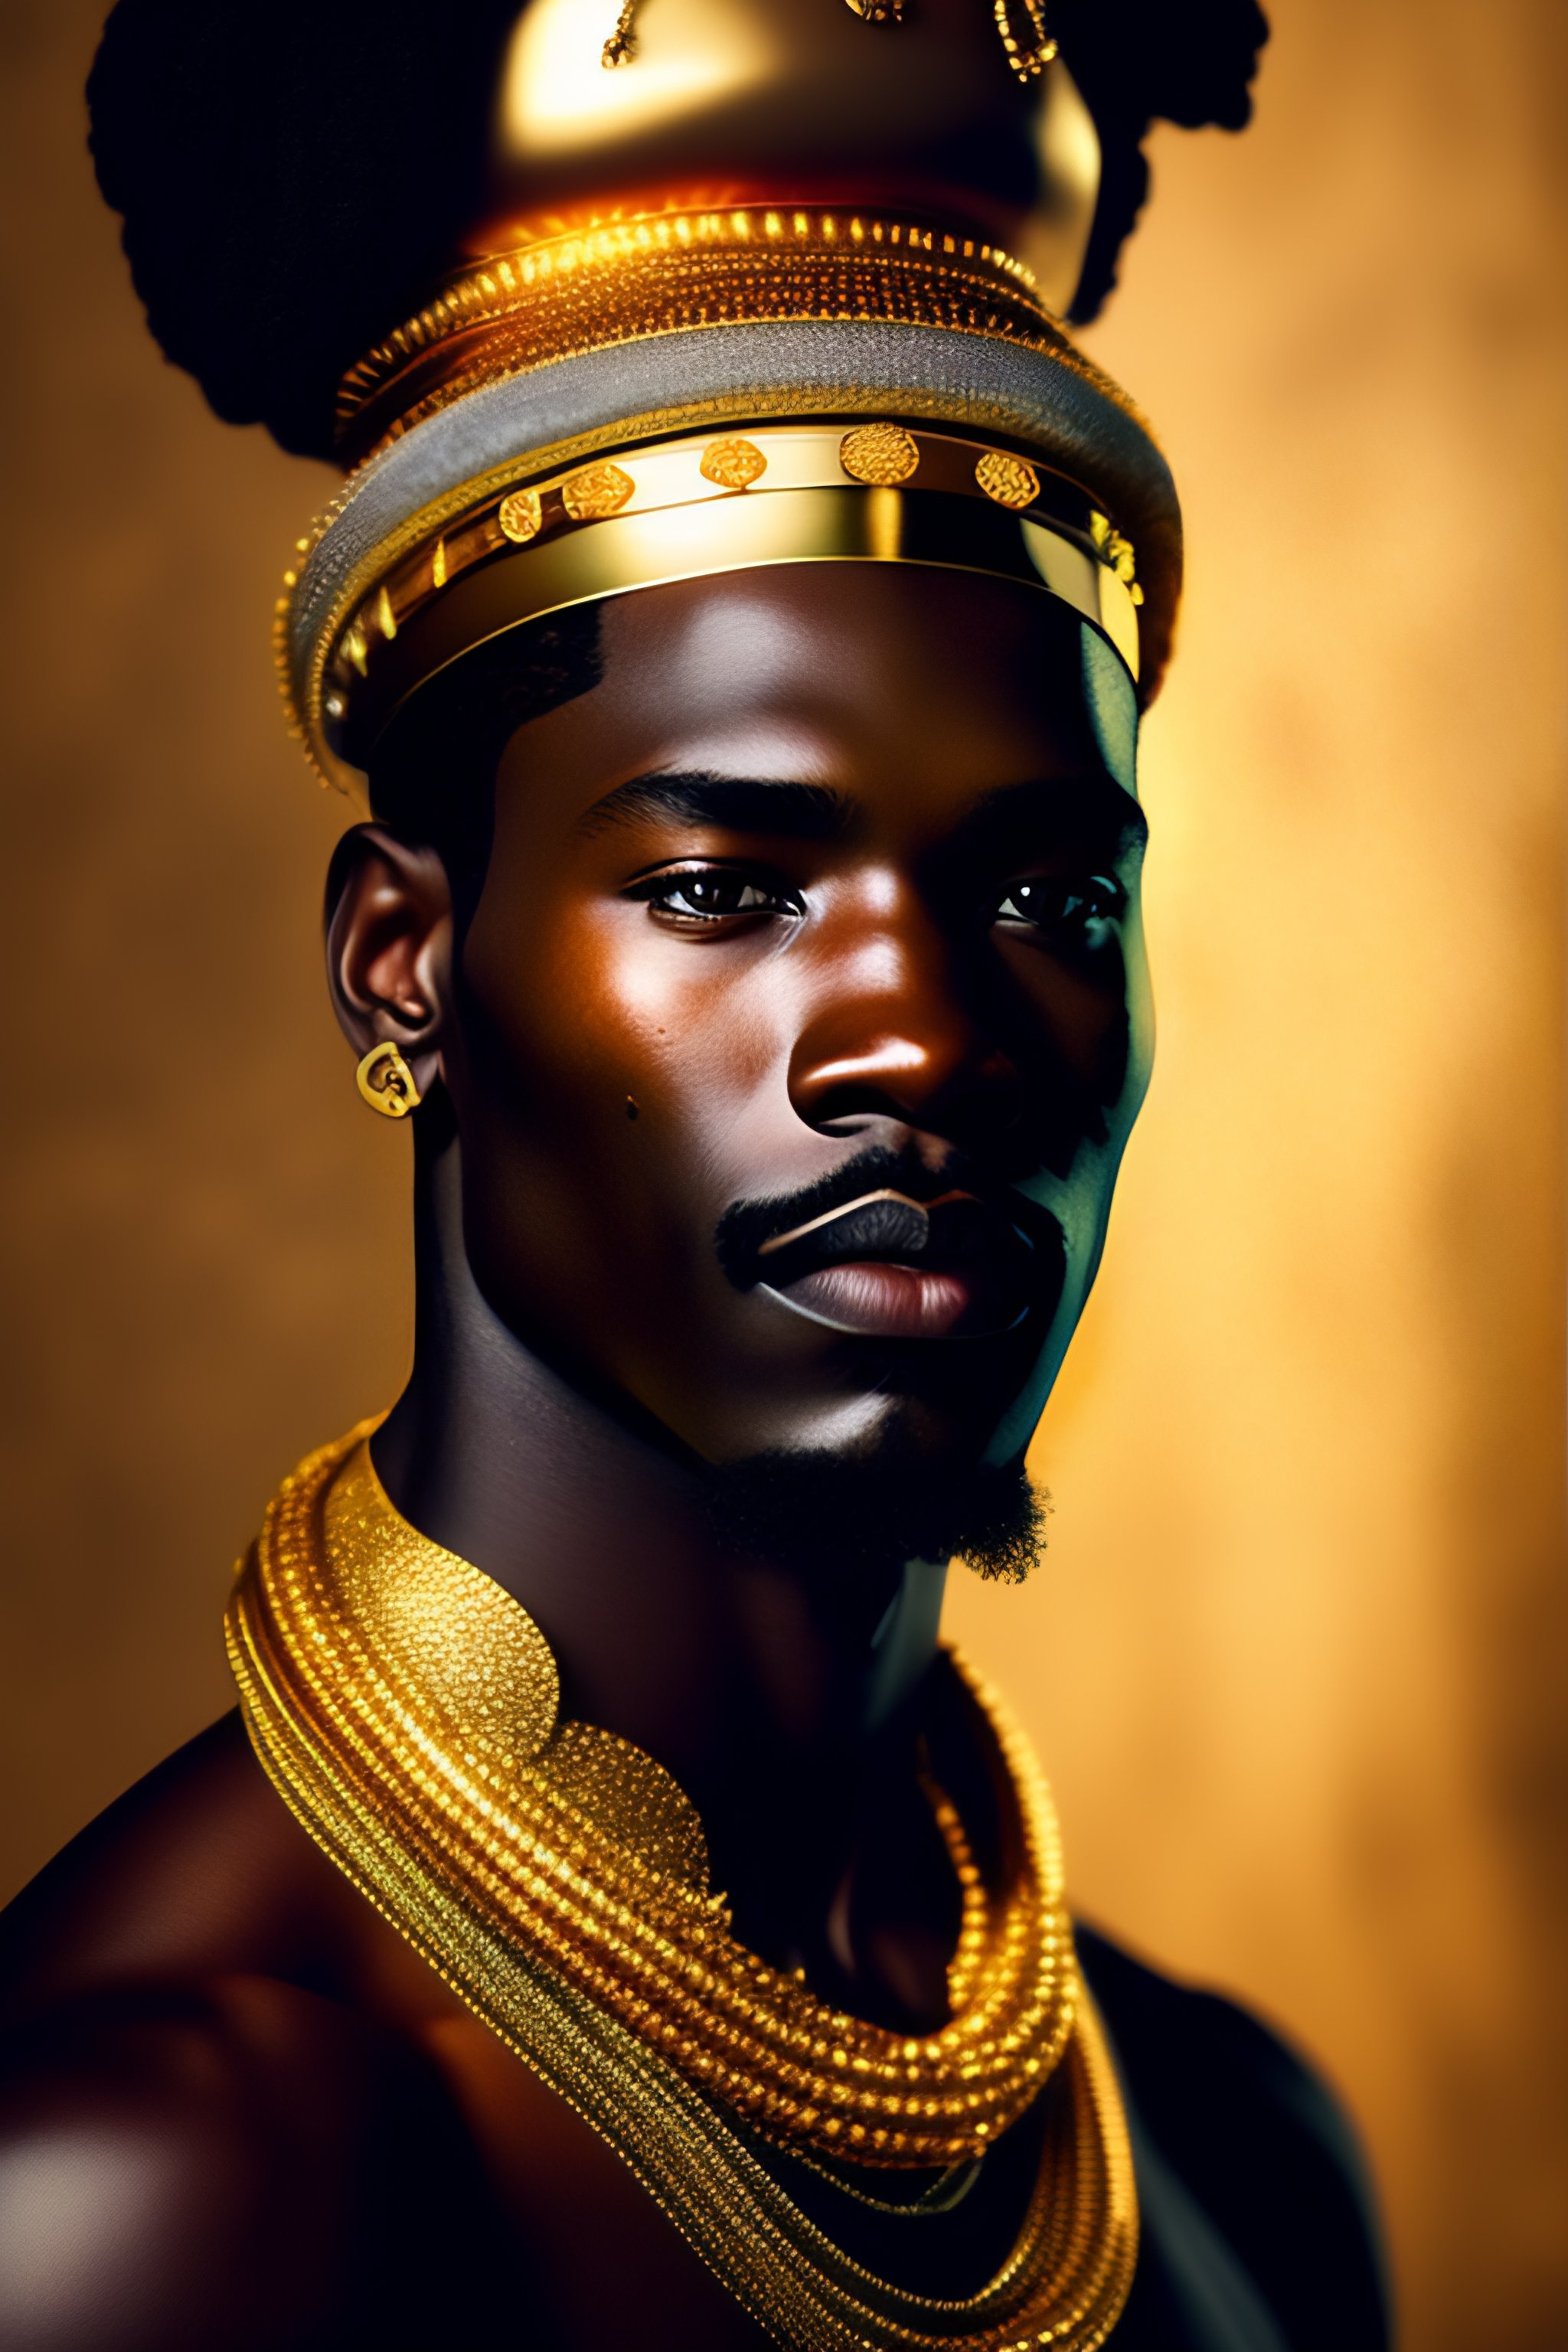 african kings gold